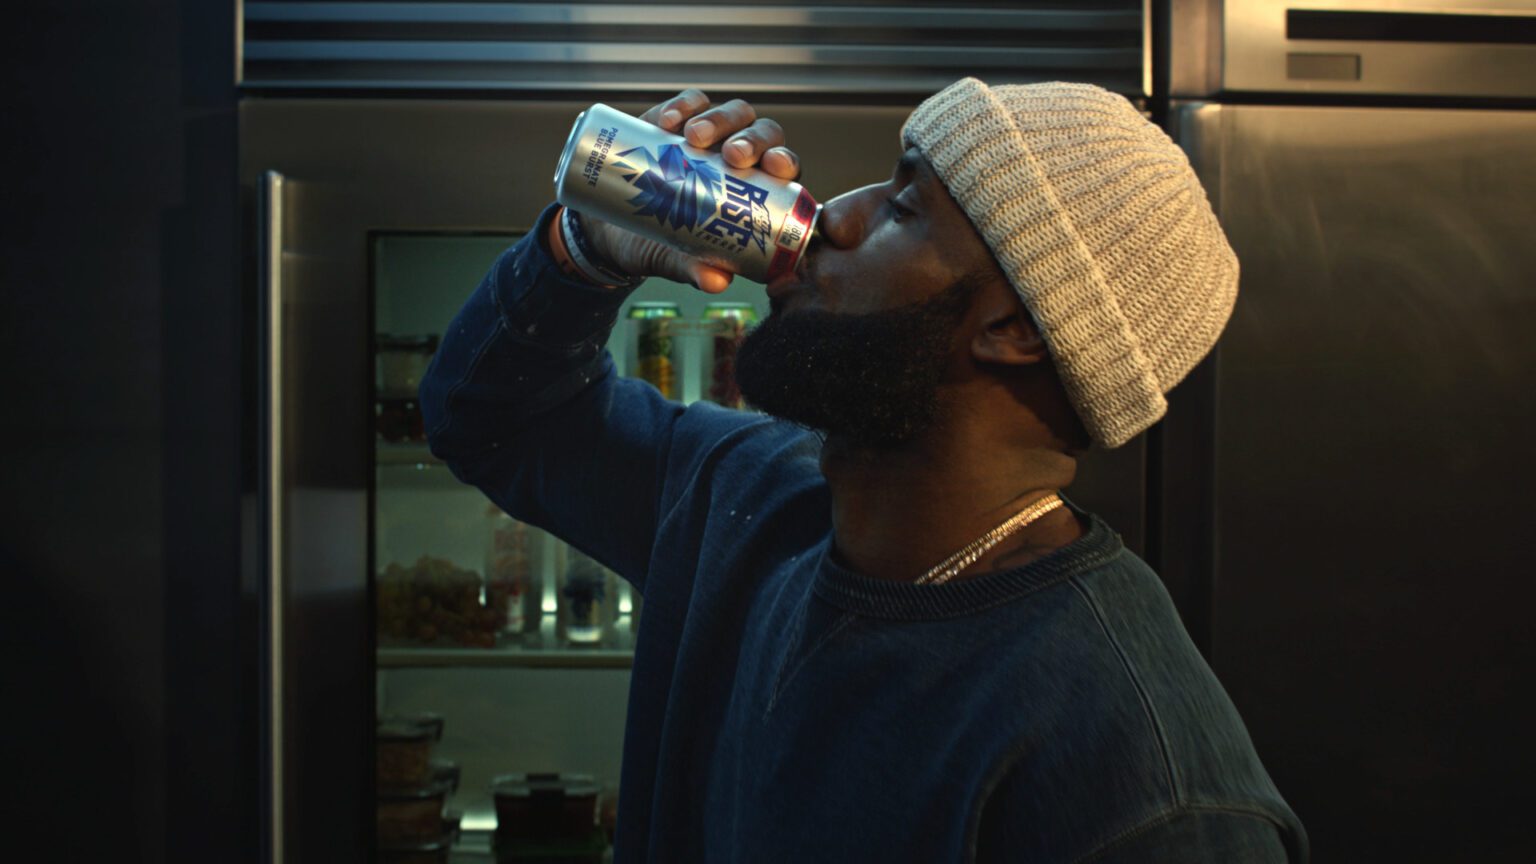 Mtn Dew Rise Energy and LeBron James unveil firstever ad campaign